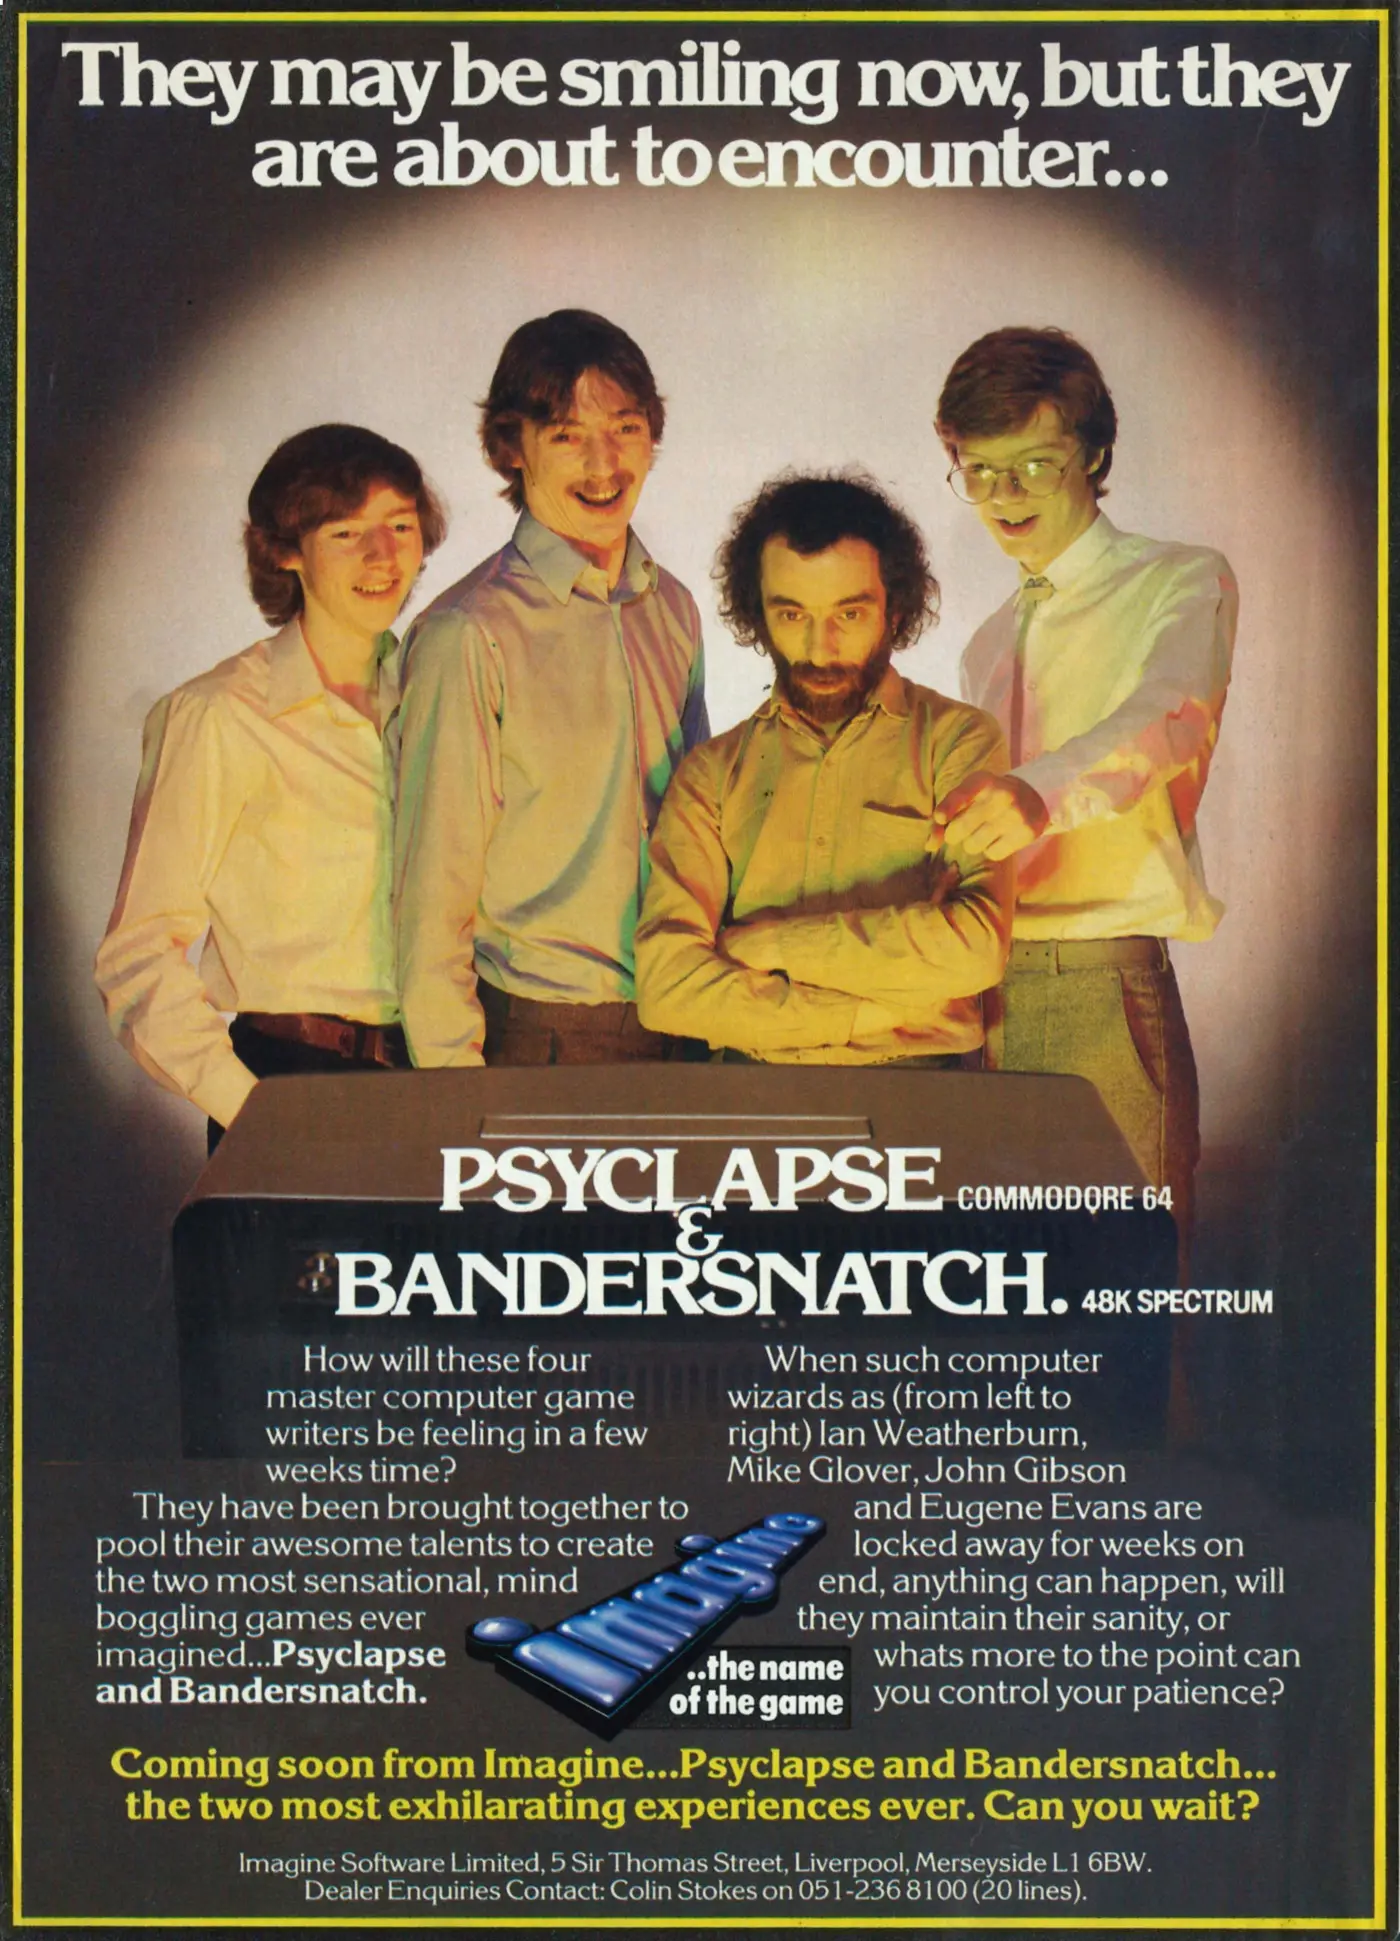 Imagine Advert: They may be smiling now, but they are about to encounter... Psyclapse and Bandersnatch, from Your Computer, February 1984